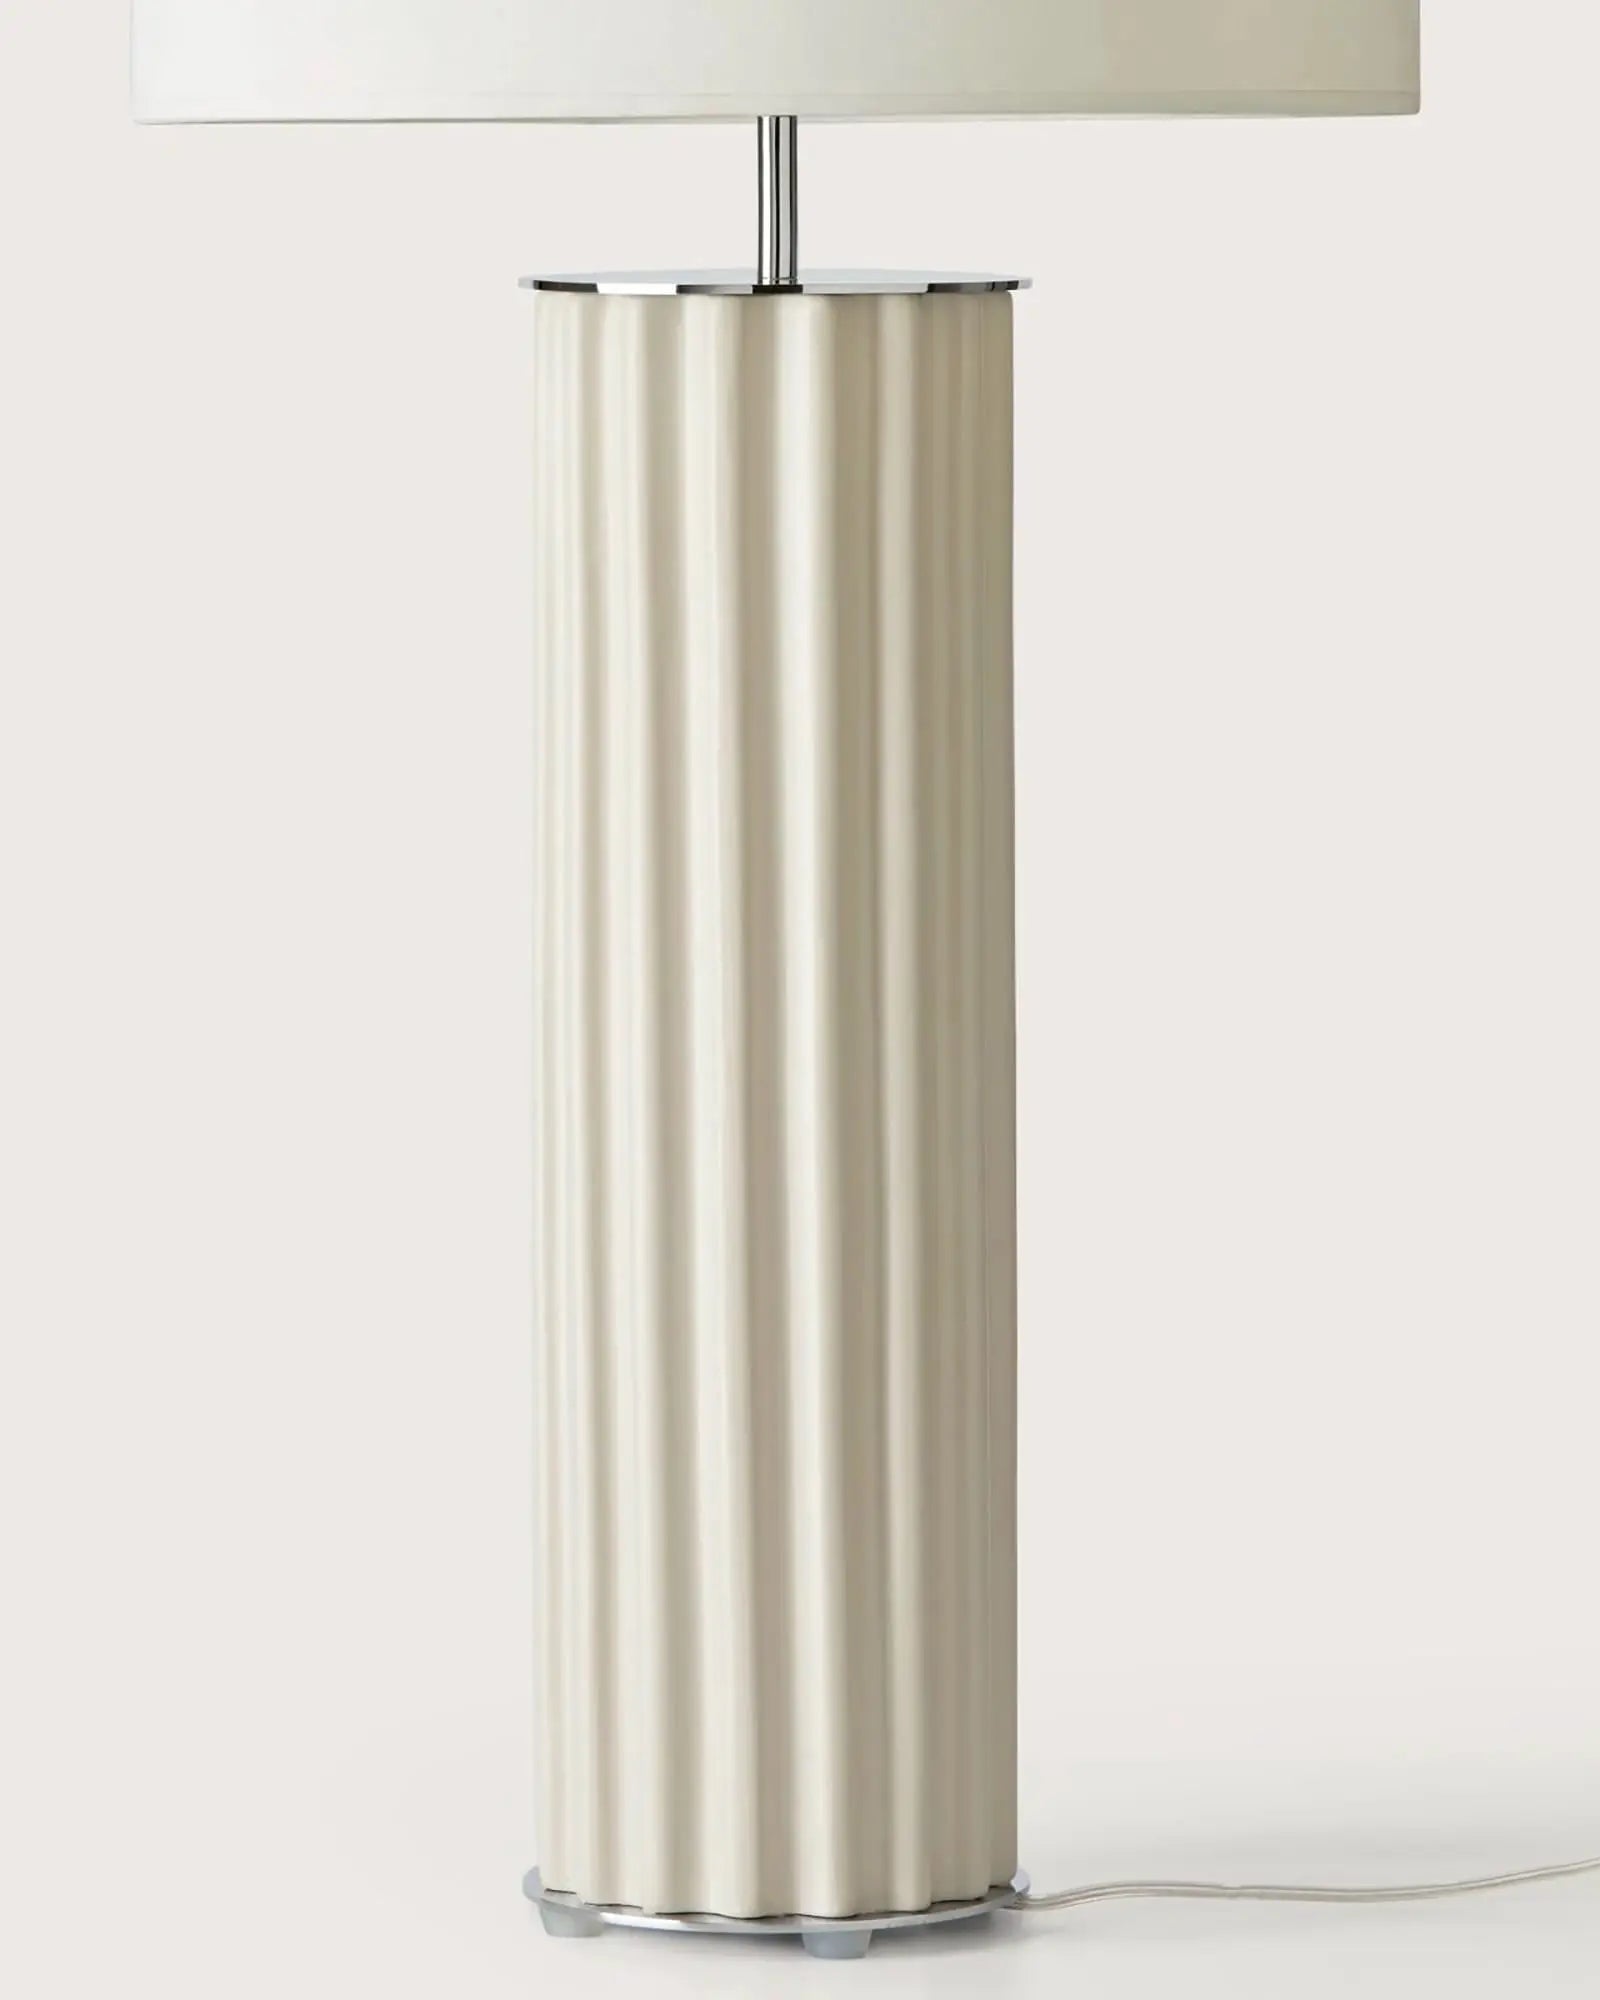 Onica ceramic contemporary large decorative light with fabric shade detail